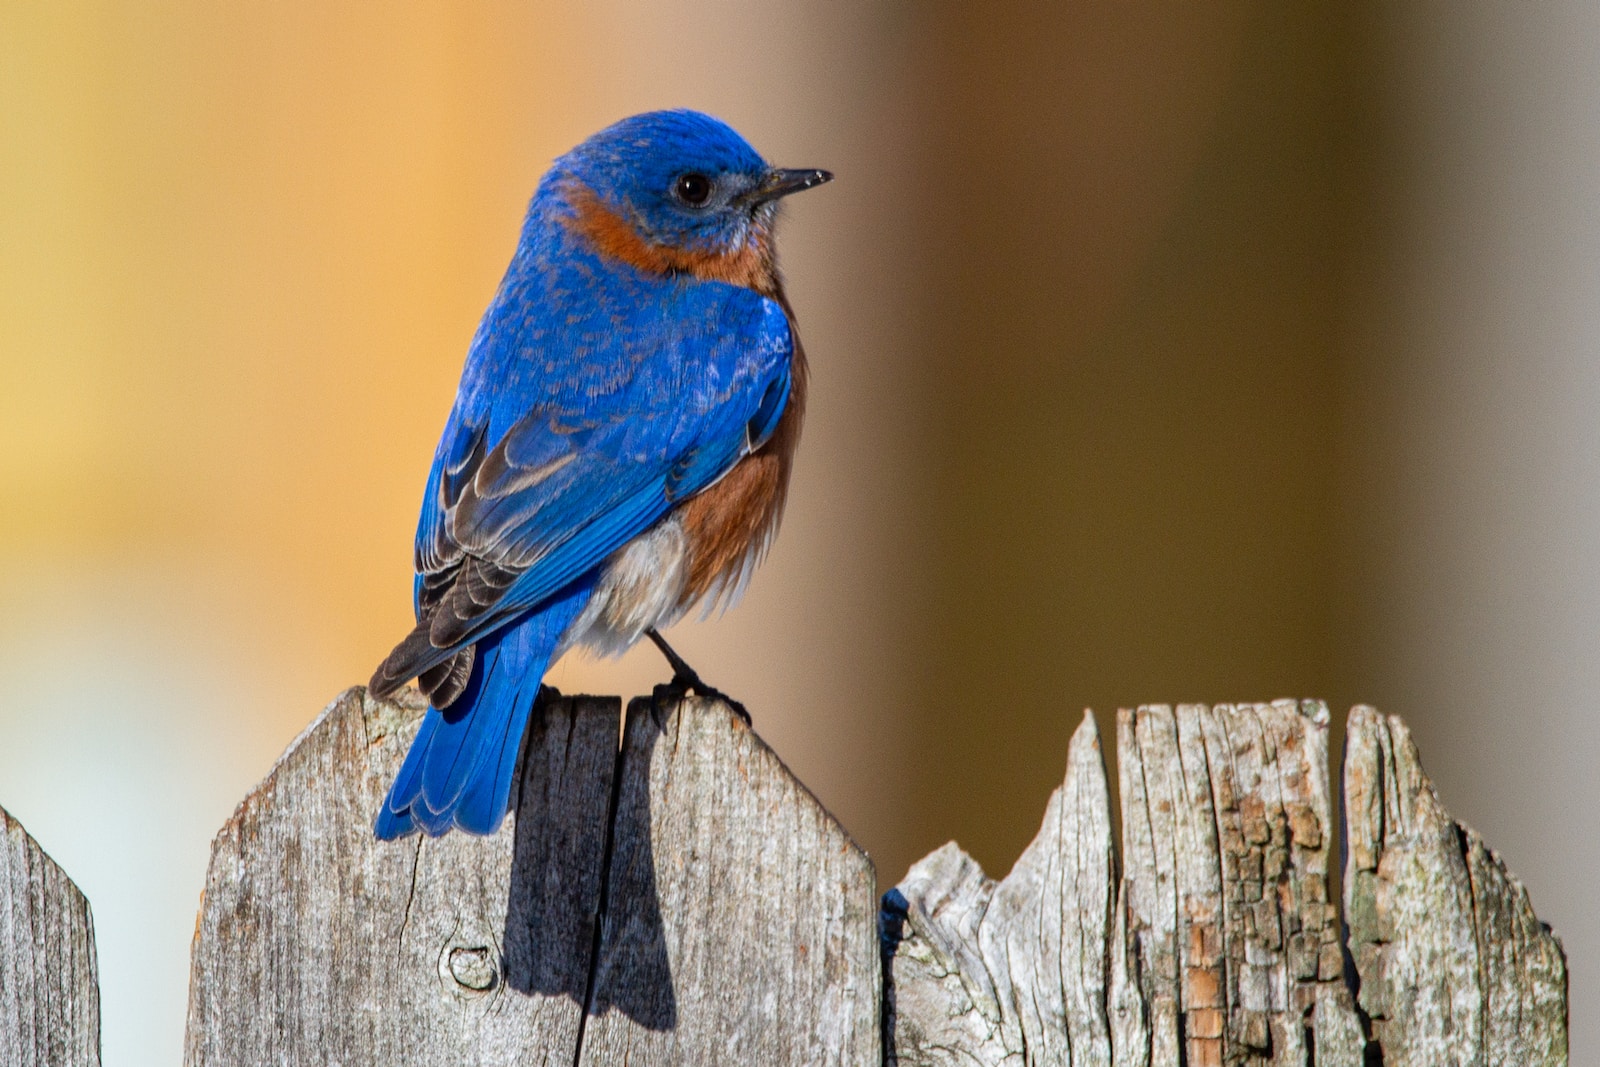 How To Attract Bluebirds To Your Own Backyard